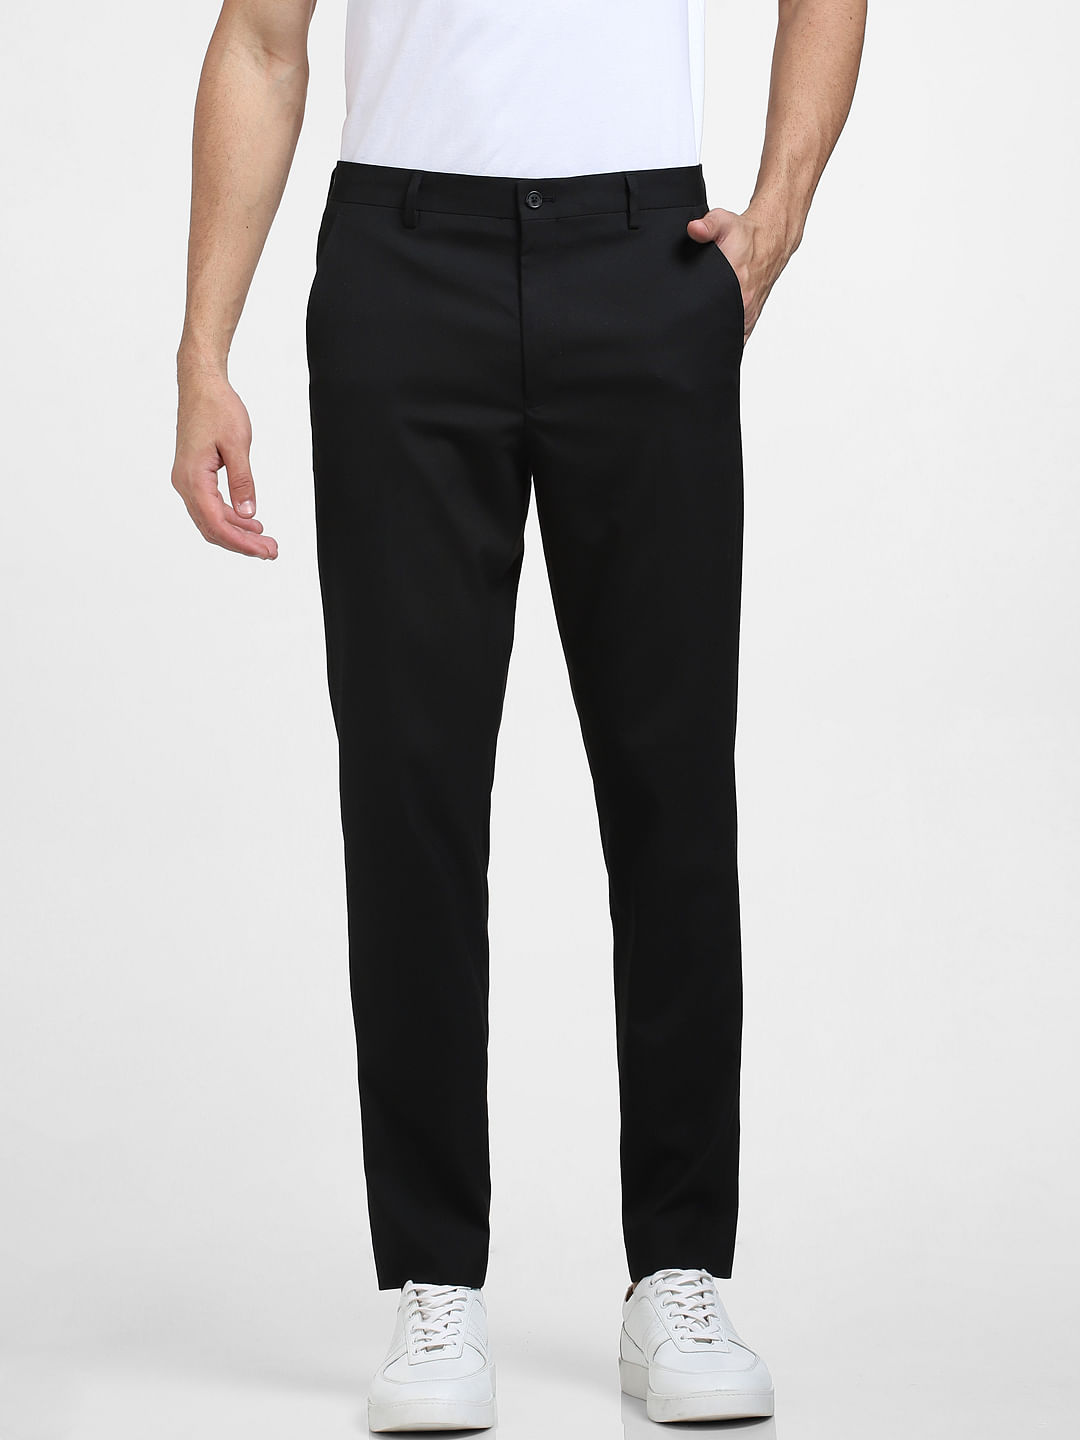 Suit trousers | Your choice! Your style - ZALANDO